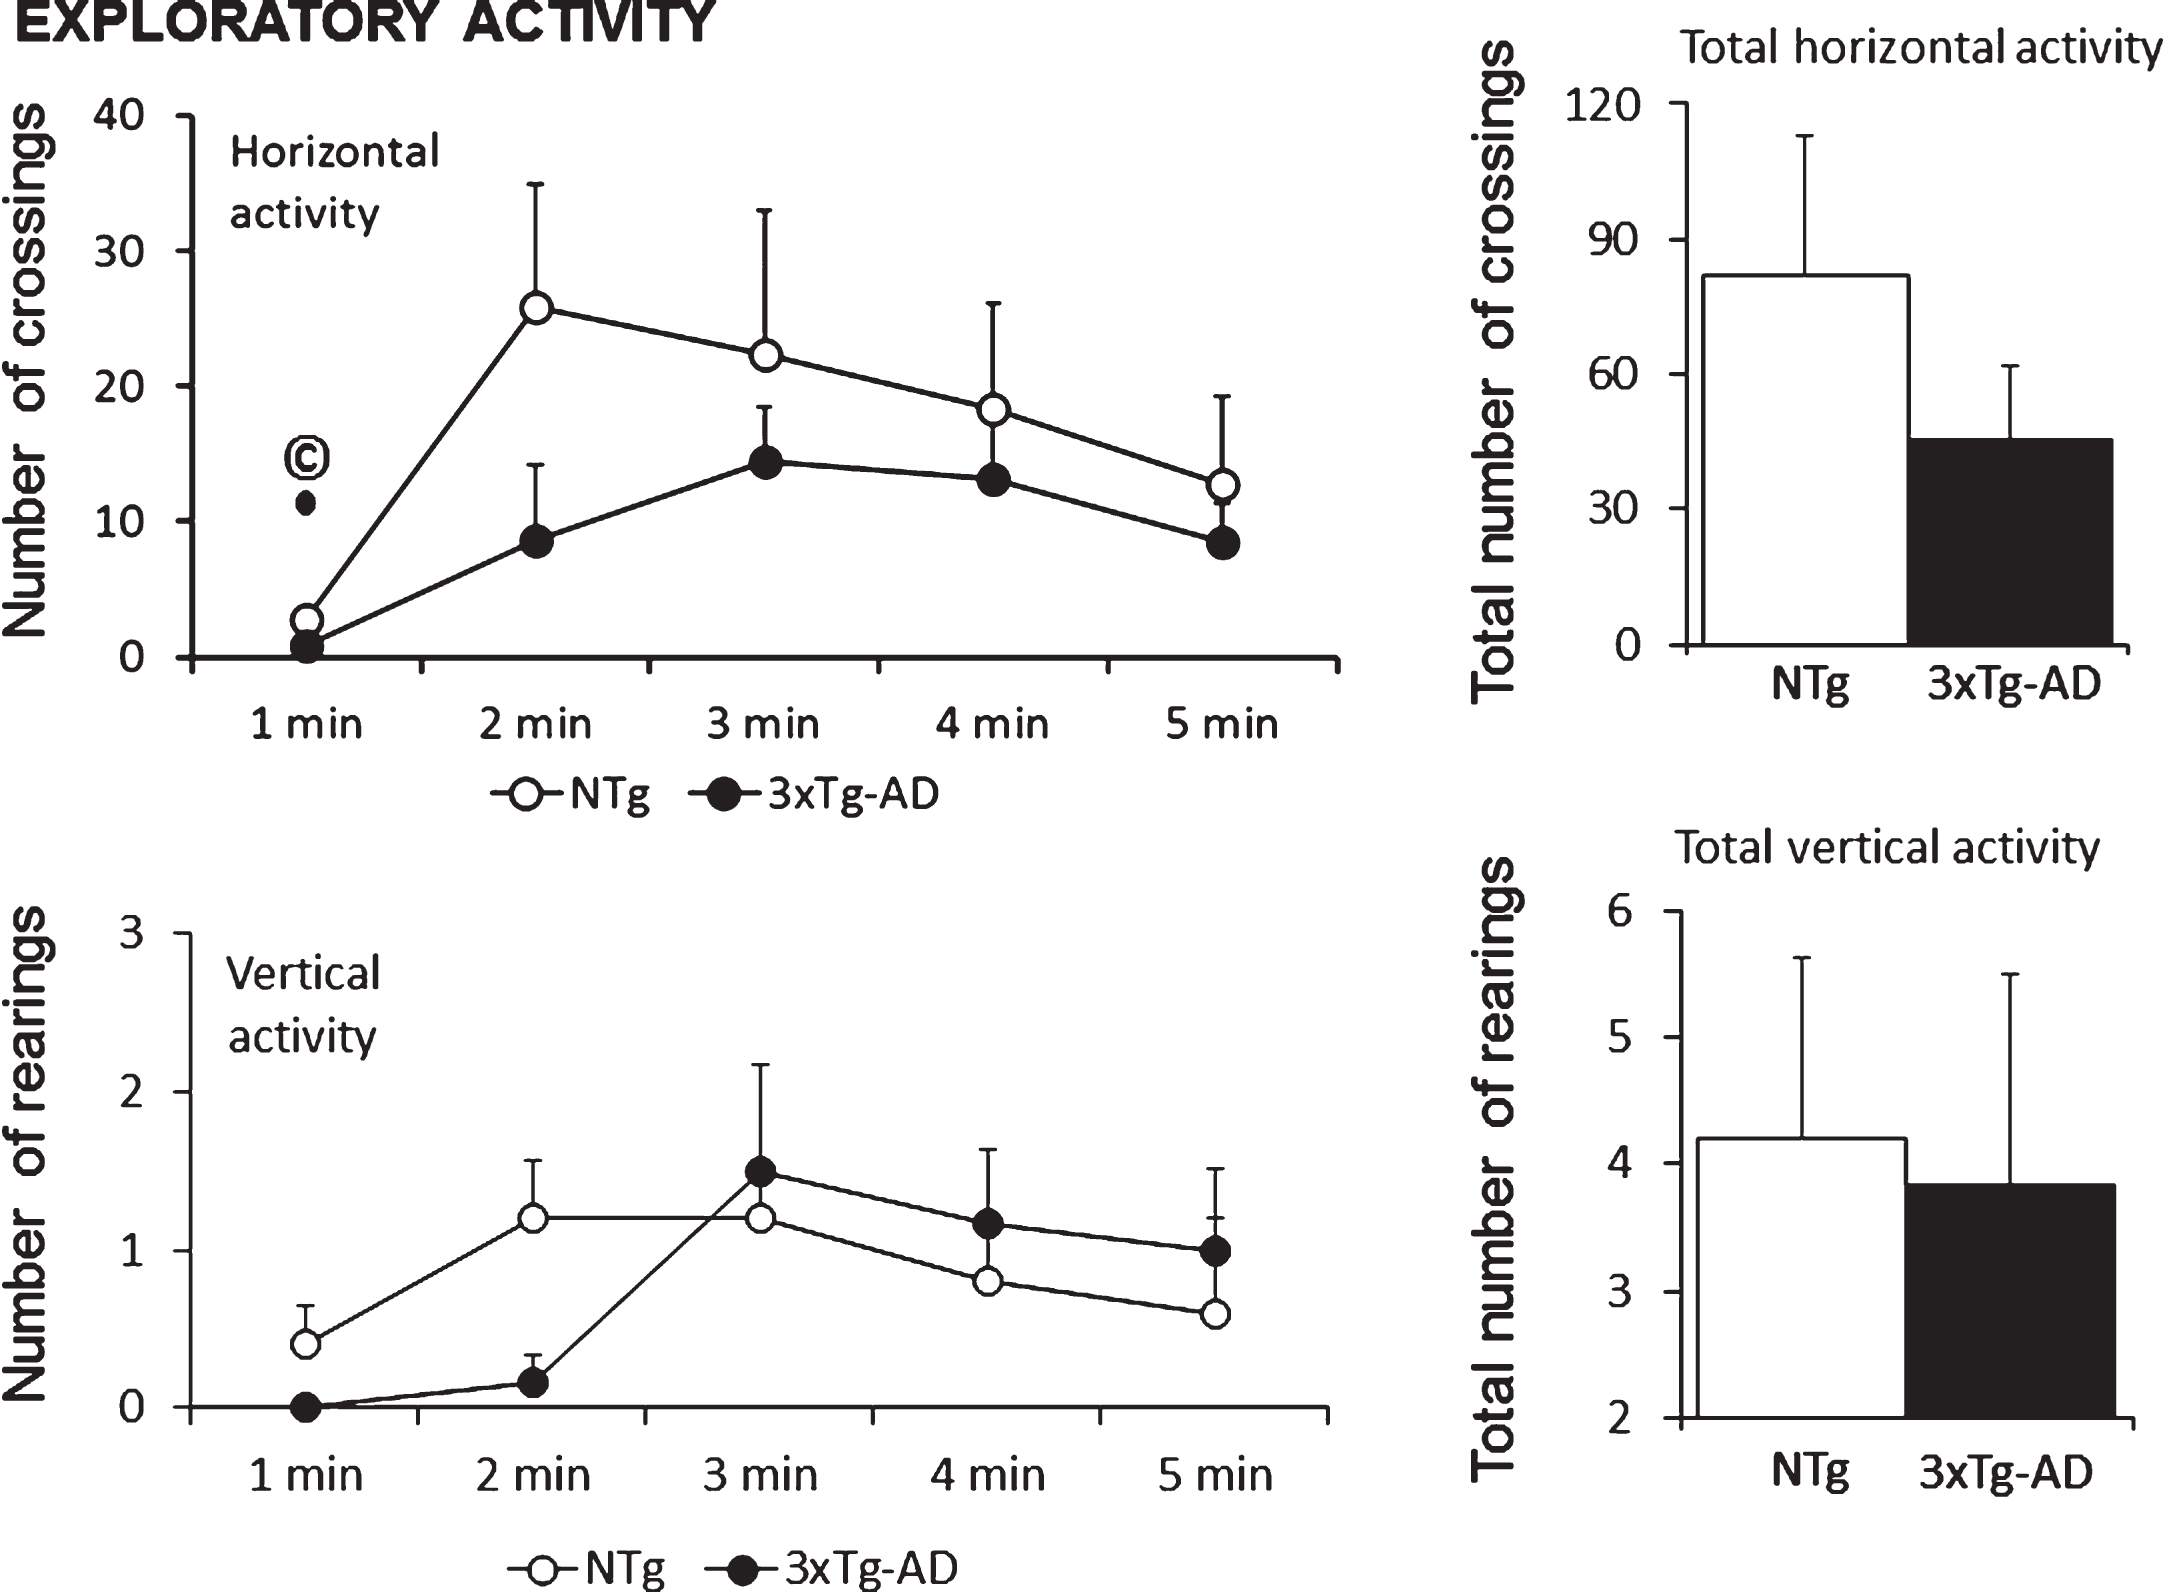 Similar exploratory activity patterns and total counts exhibited in the anxiogenic open-field test in 18-month-old female 3xTg-AD mice as compared to sex- and age-matched NTg mice with normal aging. Interestingly, horizontal activity (number of crossings) shown in the first minute of the test, a variable that measures the level of neophobia to this new environment, correlated (© positive Pearson’s correlation, p < 0.05) with lifespan of NTg and 3xTg-AD mice (see Fig. 4B and 4J).